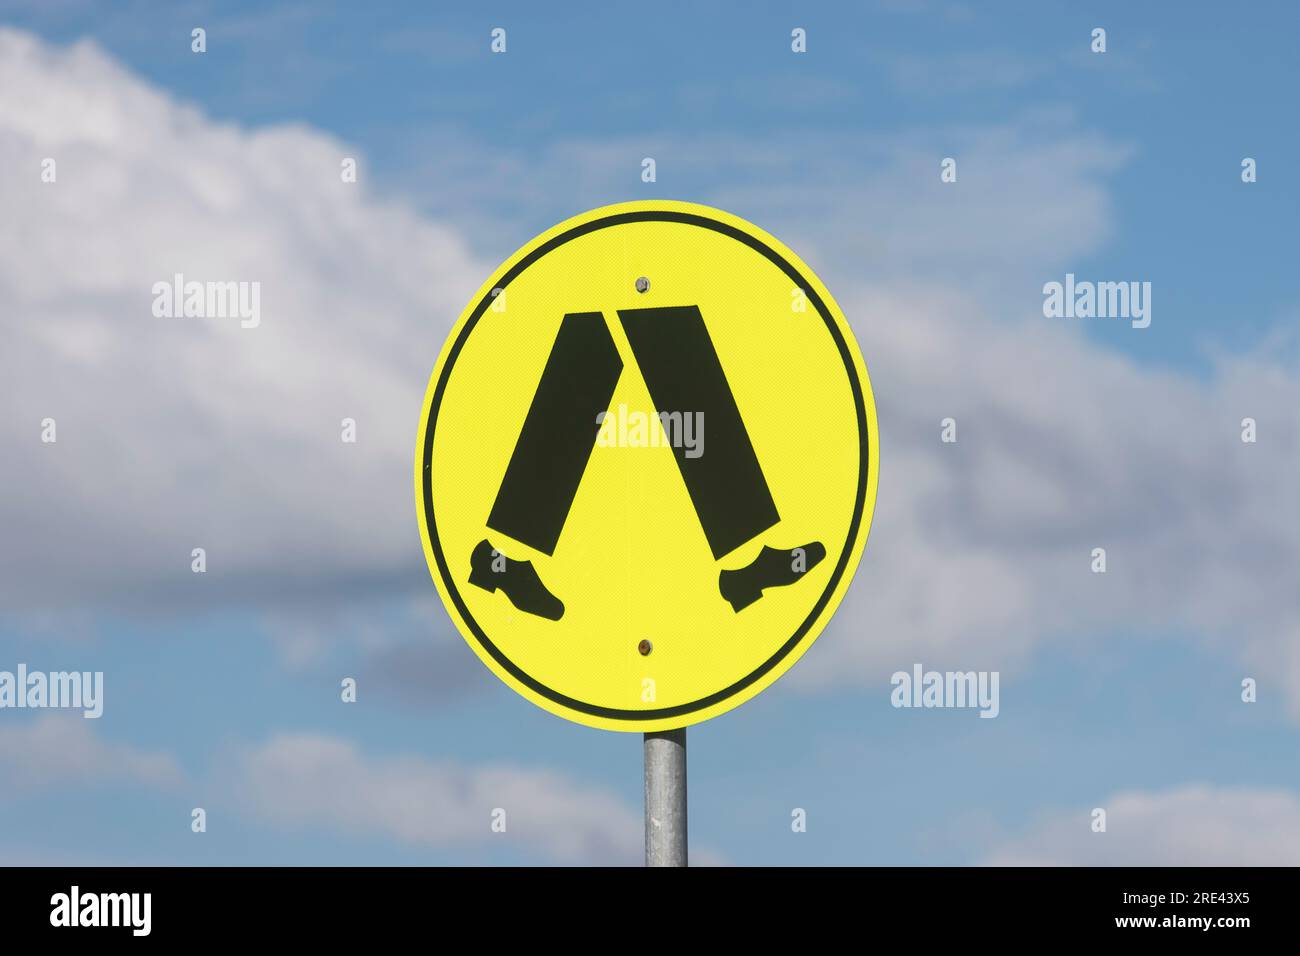 Black and luminous yellow circular road sign at pedestrian crossing. Legs and feet walking. Blue sky and white clouds above. Queensland, Australia. Stock Photo